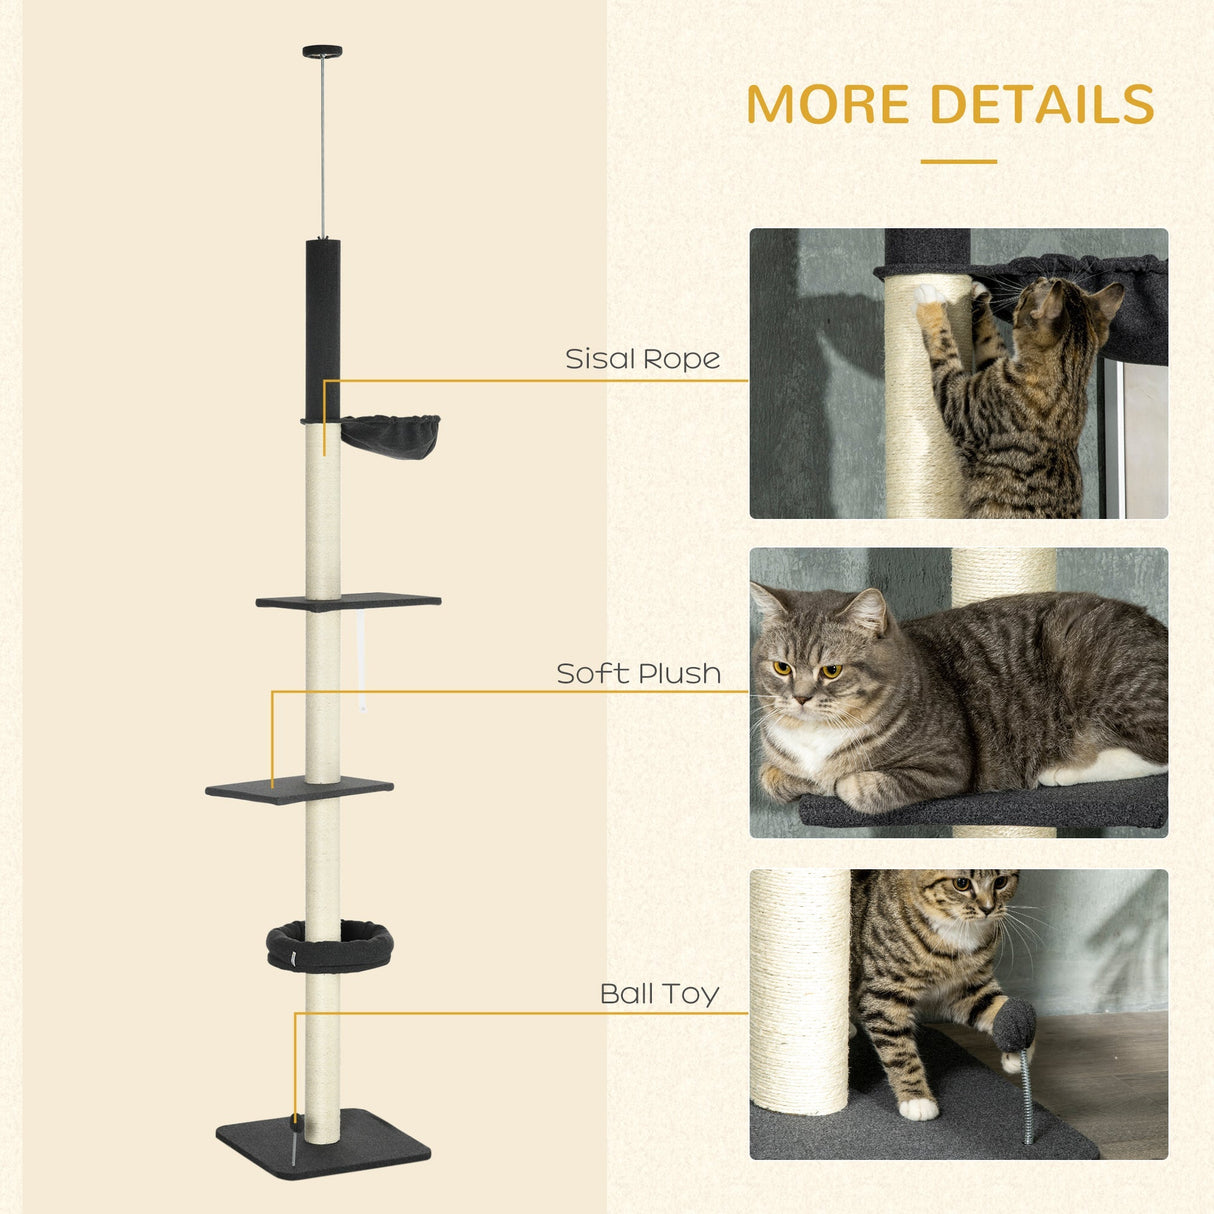 240-270cm Floor-To-Ceiling Cat Tree, 5 Tier Cat Climbing Tower, with Bed, Hammock, Platforms, Black and Cream, PawHut,